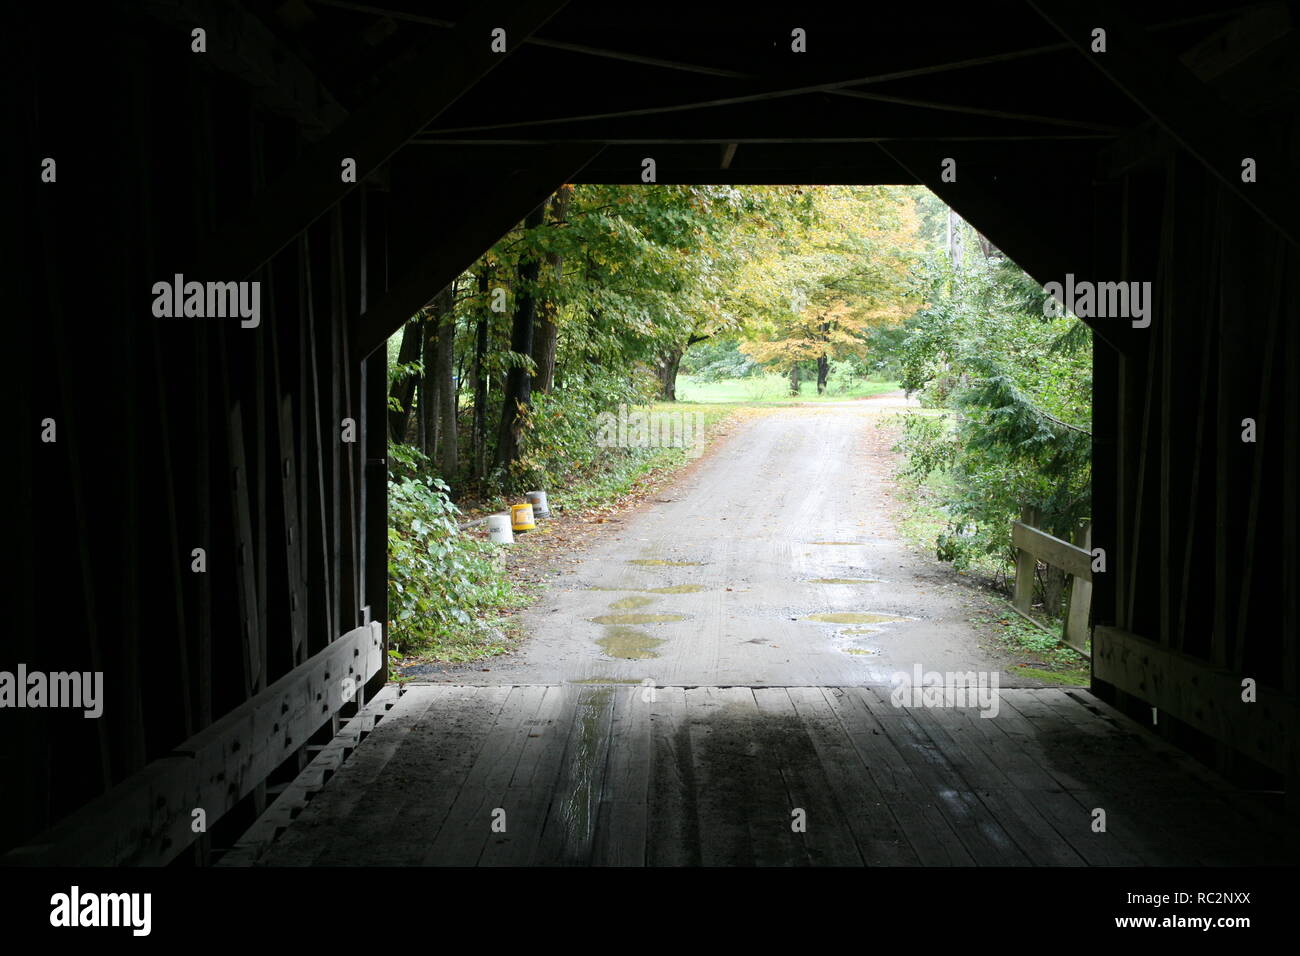 Blow Me Down Covered Bridge, SW of Plainfield in Cornish, New Hampshire. Silhouette view from inside bridge showing tree line driveway beyond. Stock Photo